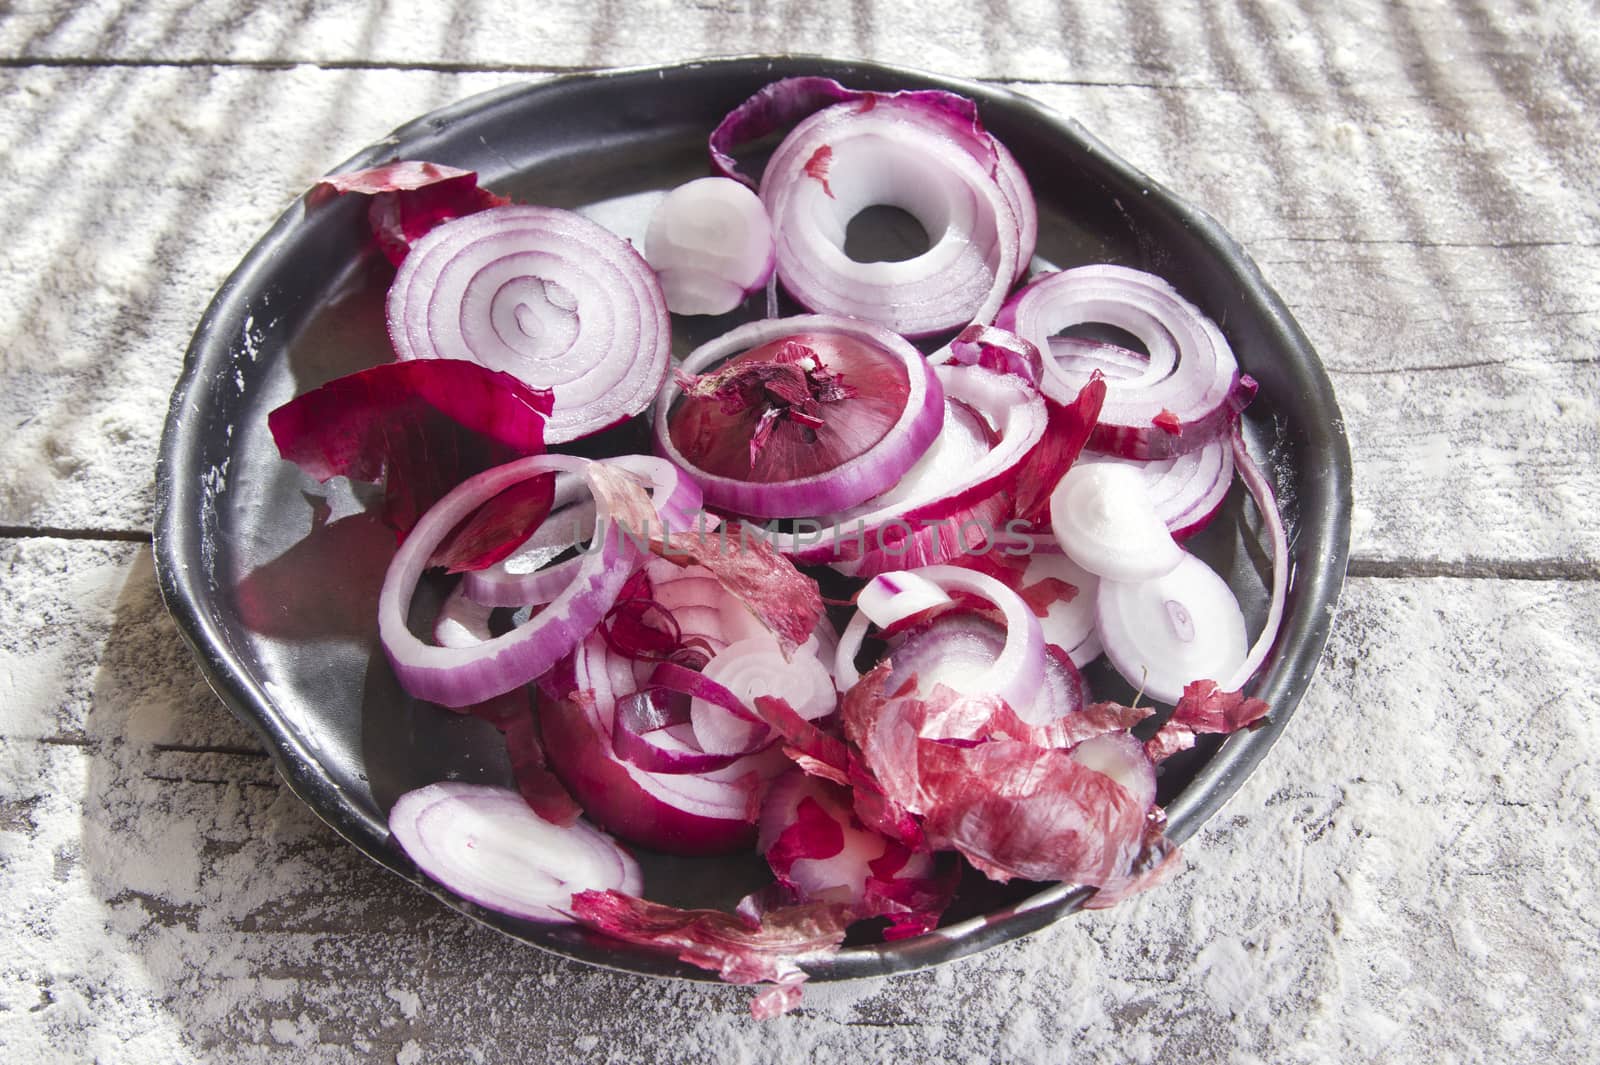 Presentation of red onion in small tray